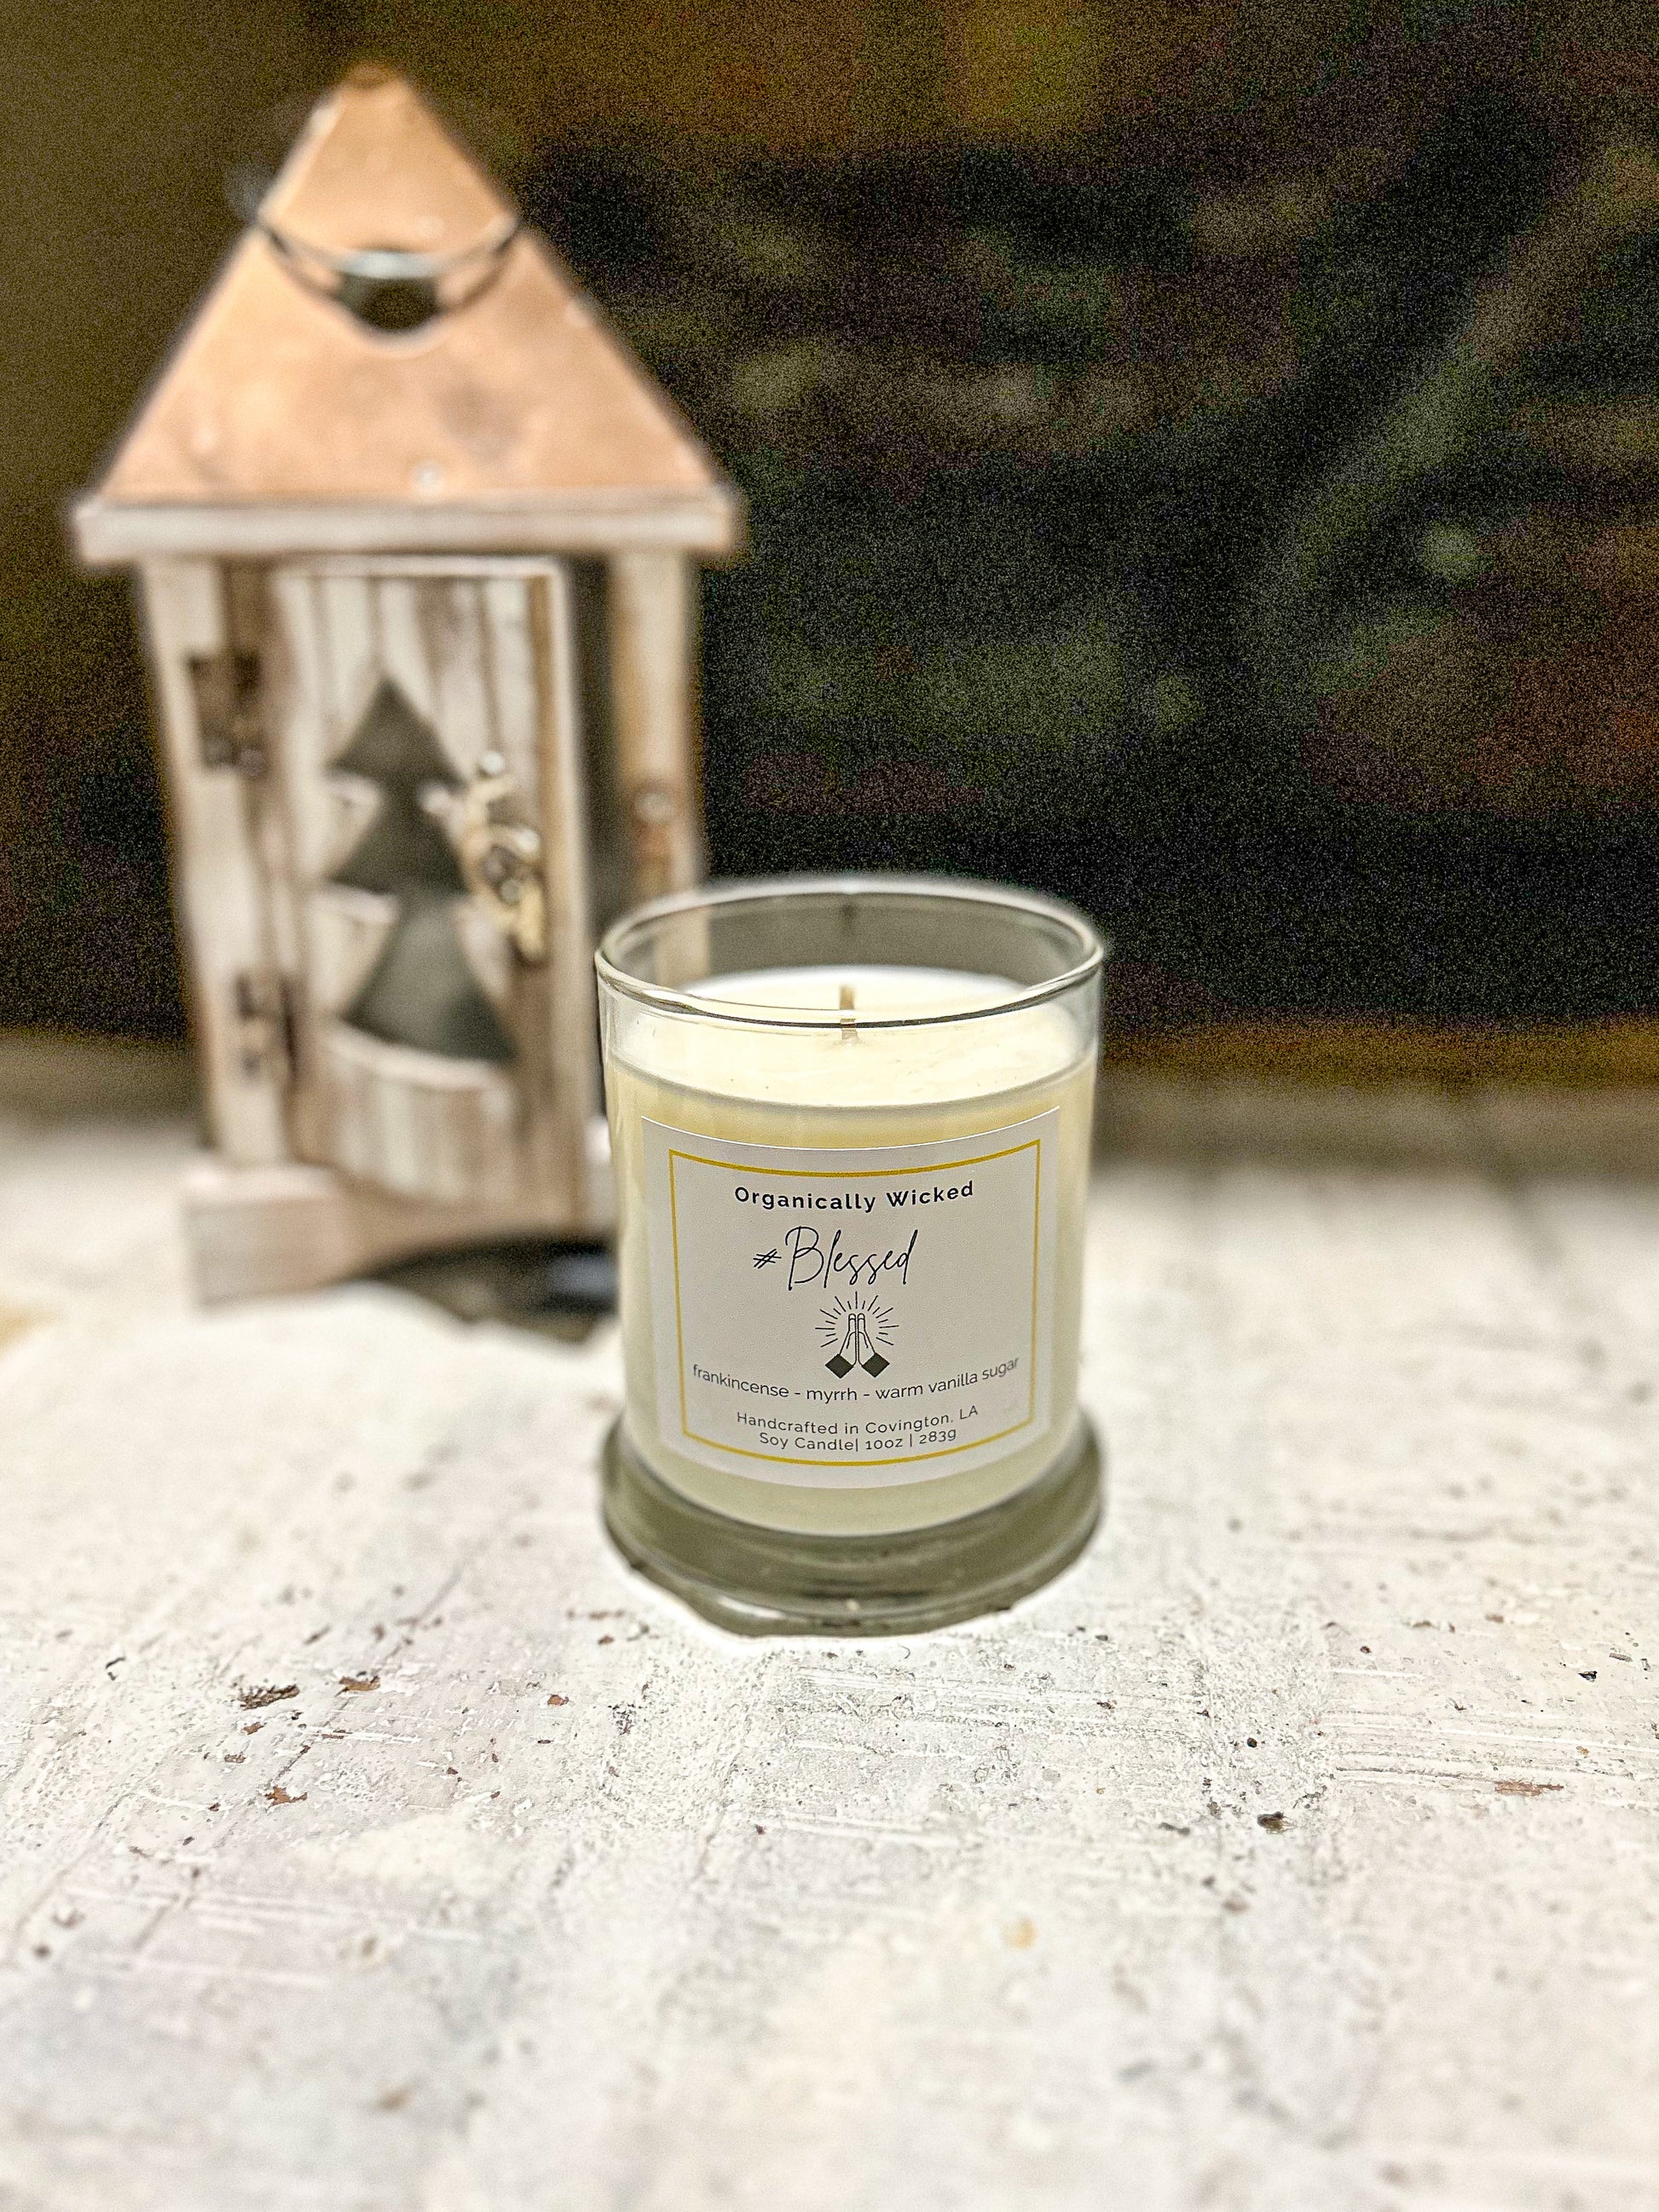 100% Soy, Highly Scented, Hand Poured Soy Candle, 8.1 oz (Dark Cherry, Almond & Vanilla)